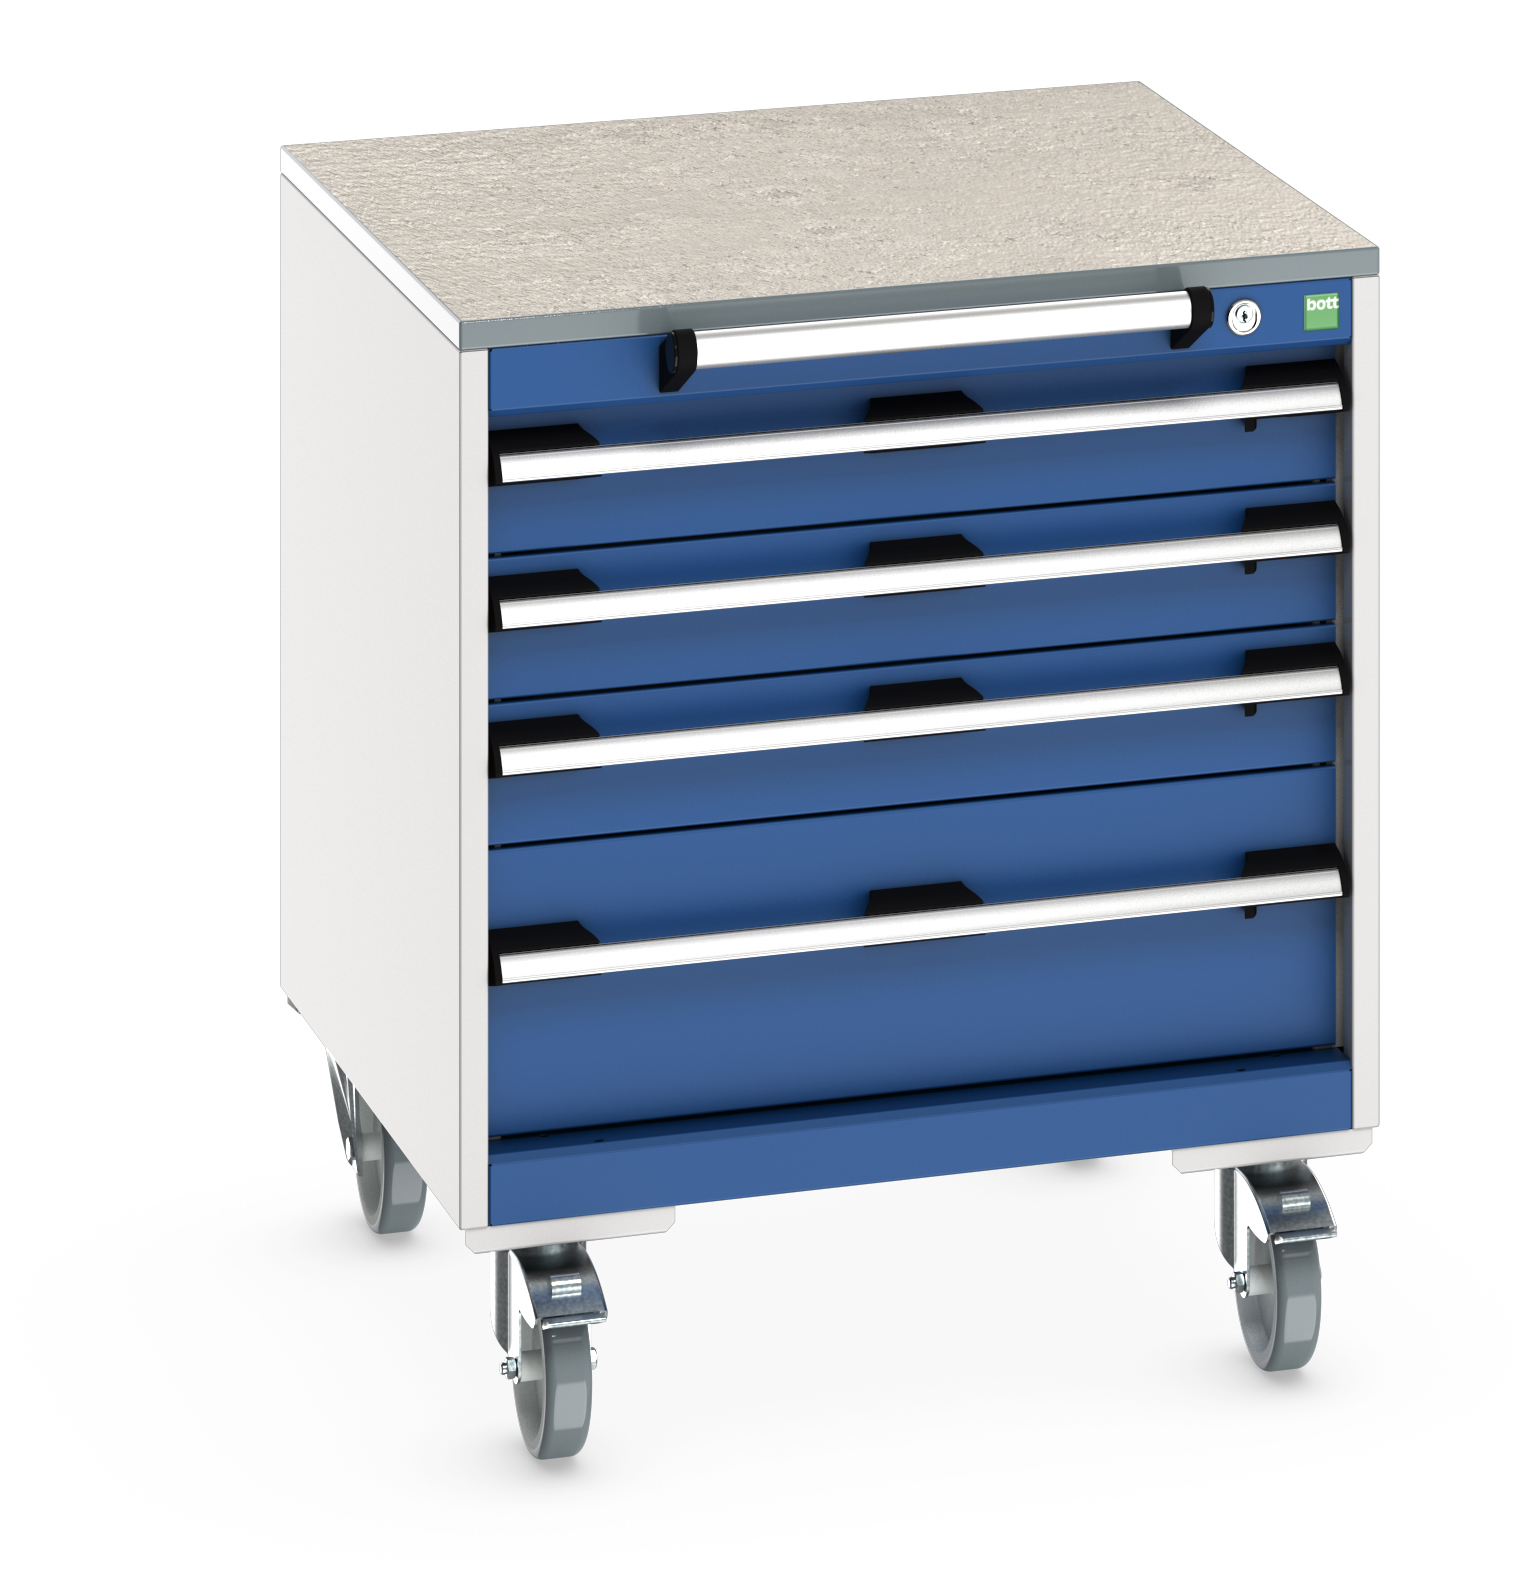 Bott Cubio Mobile Drawer Cabinet With 4 Drawers & Lino Worktop - 40402144.11V